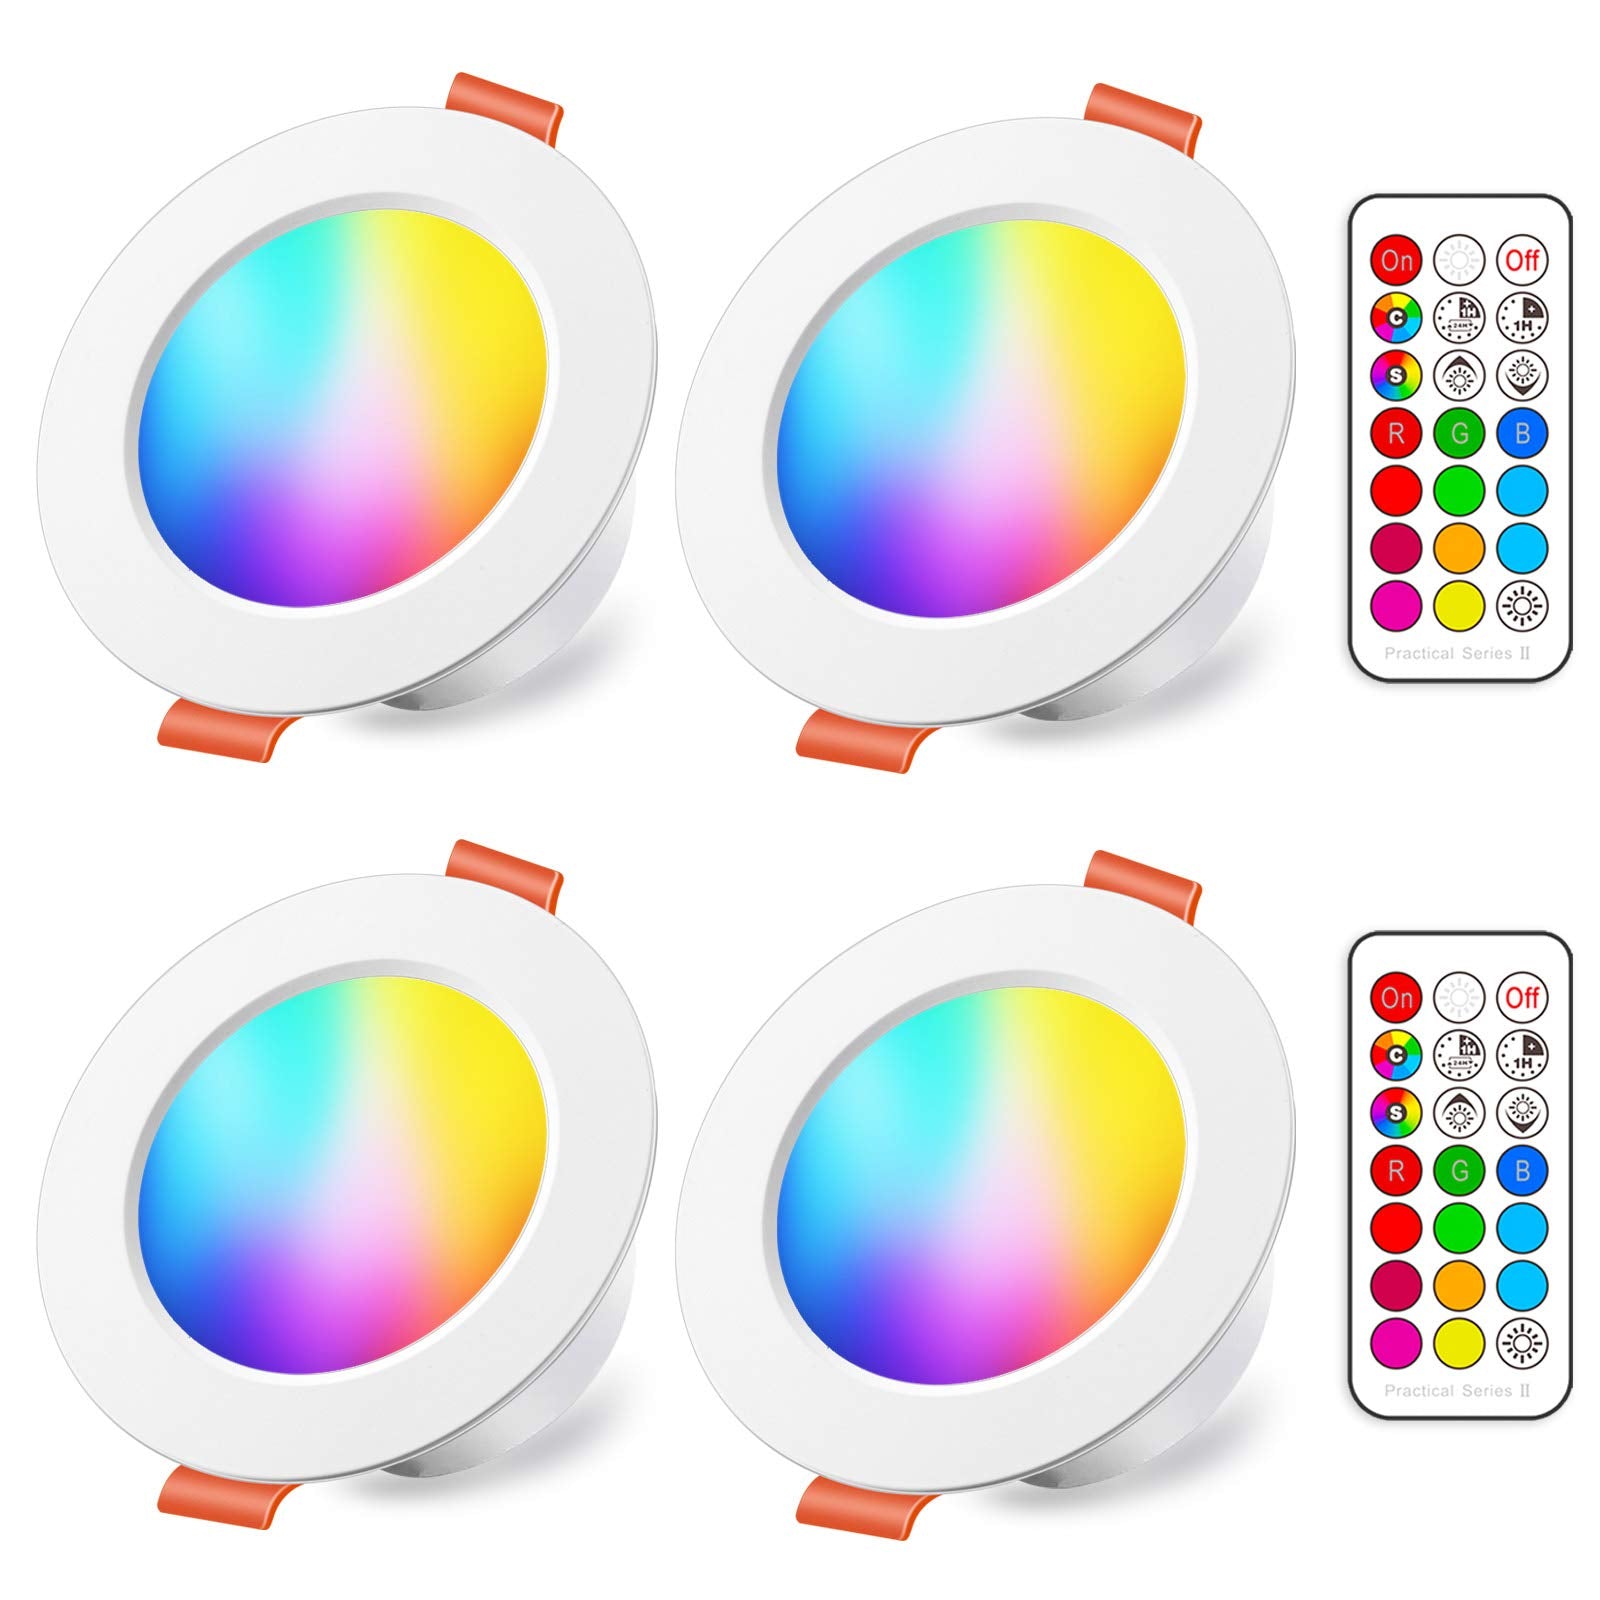 LED Recessed Ceiling Lights, 8W Colour Changing RGB, 3 Inch Spotlights Round Panel Downlights Warm White 2700K, 12 Colours 2 Modes Timing with Remote Control (4 Pack)